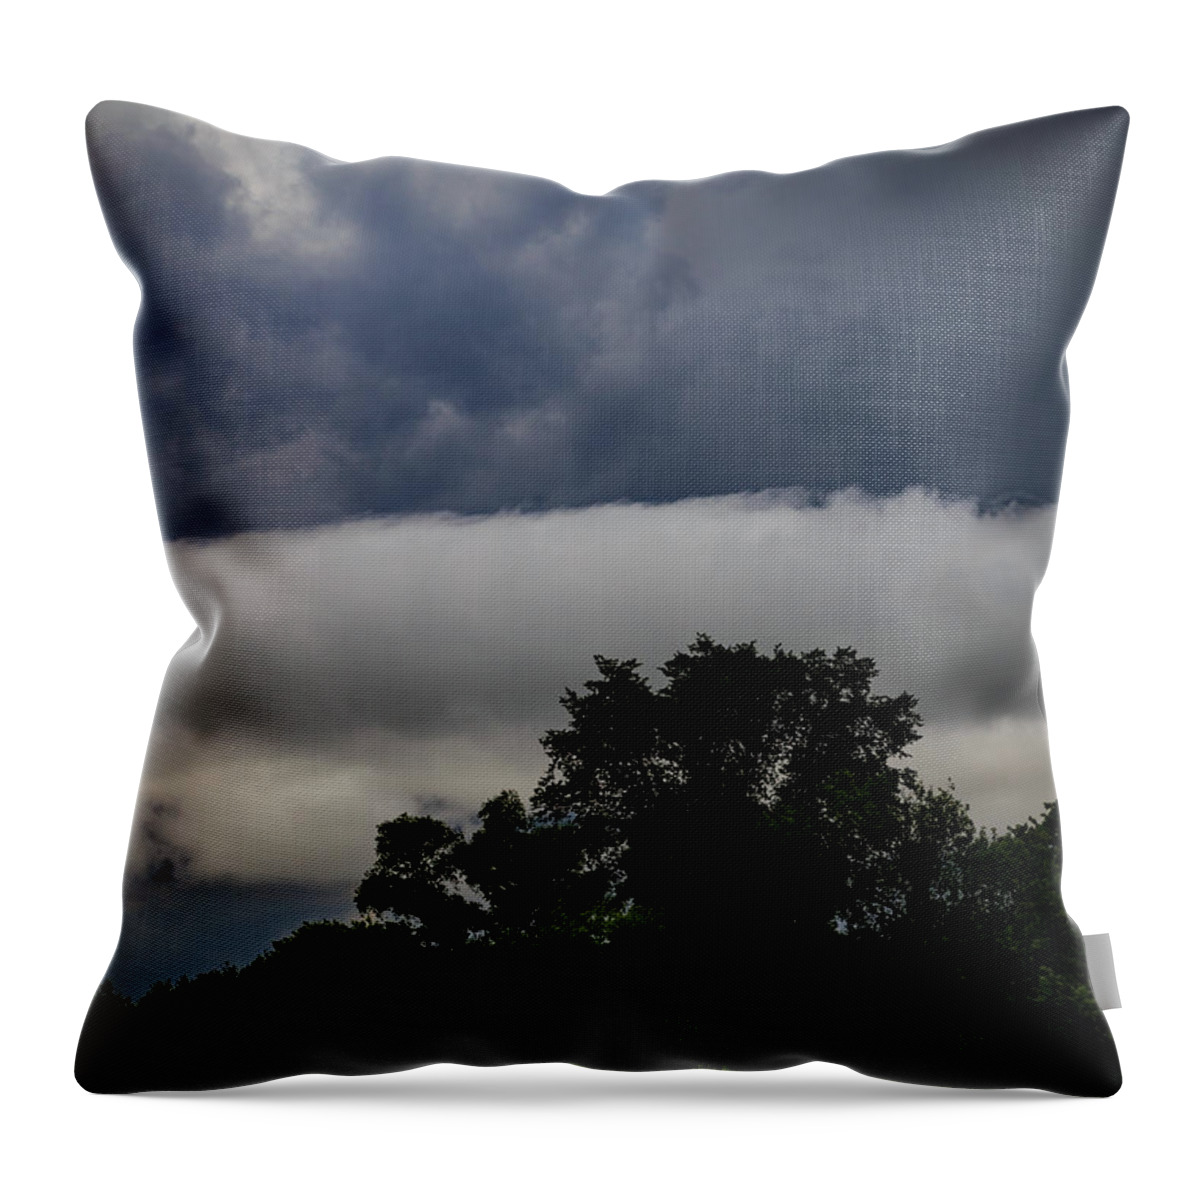 Sky Throw Pillow featuring the photograph Stormy Summer Sky by Kathleen Scanlan